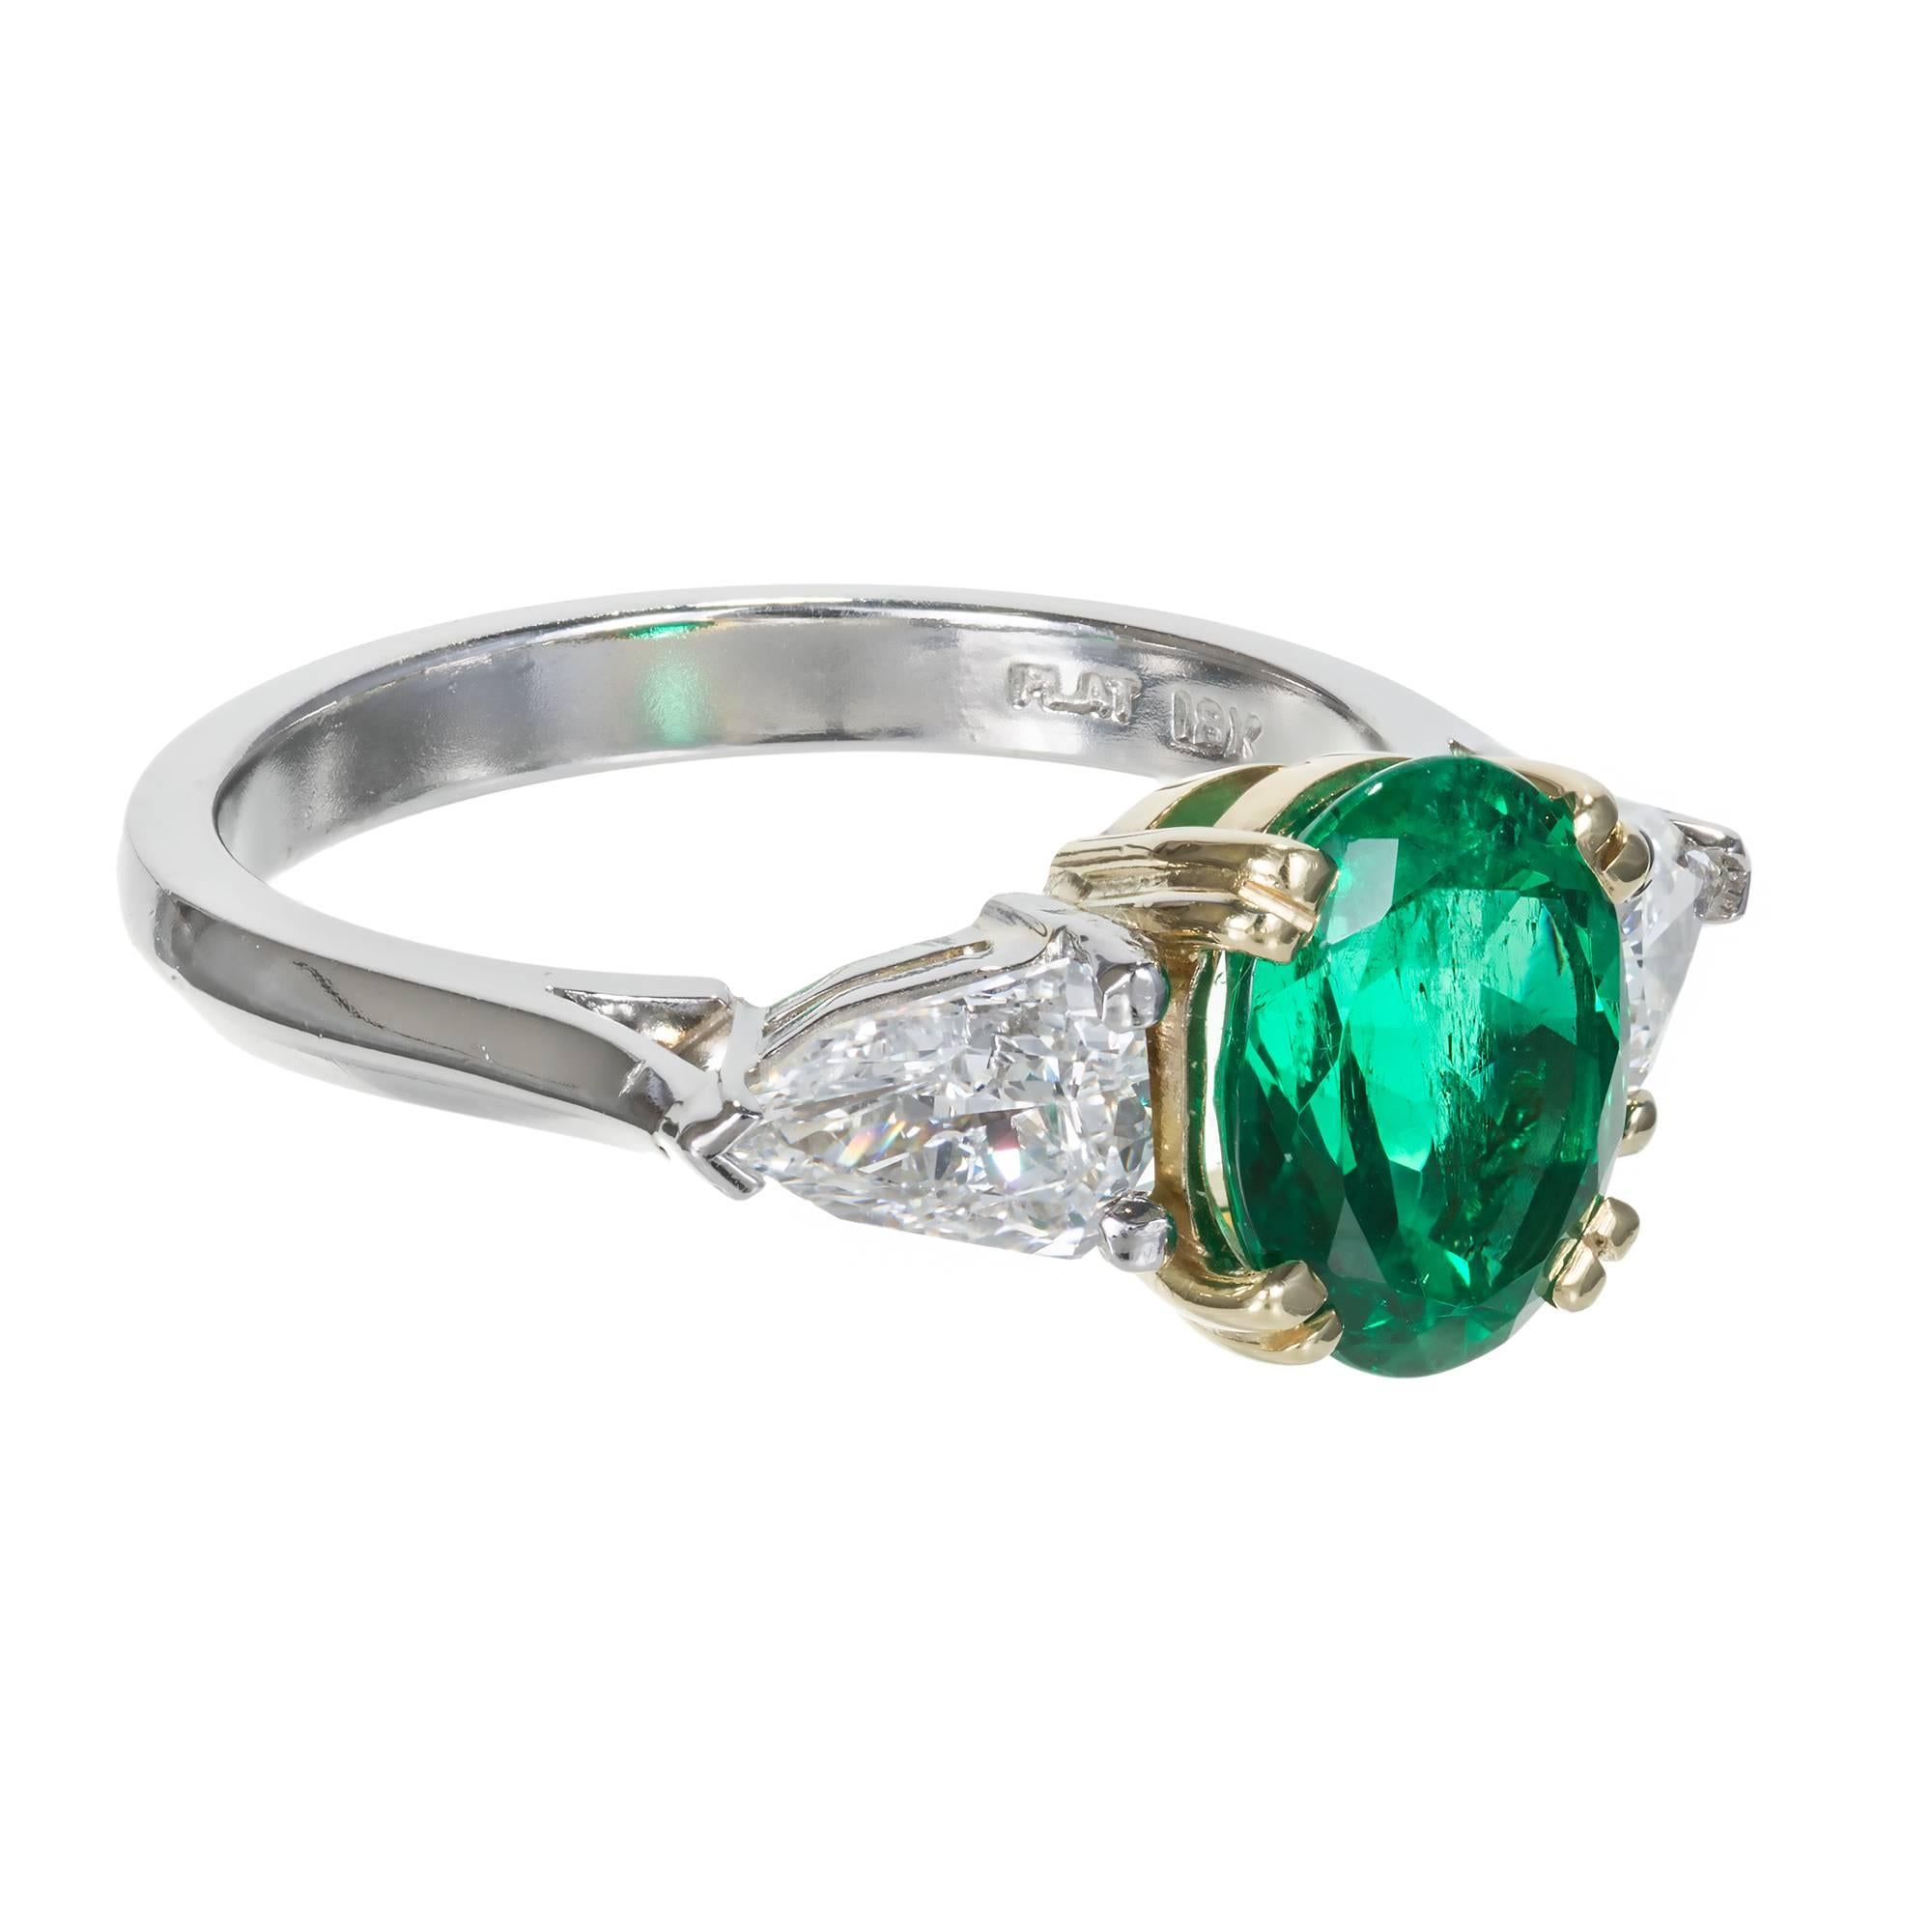 Oval vivid green Emerald diamond three stone engagement ring.  Platinum and 18k yellow gold setting. AGL Certified as natural Emerald minor clarity enhancement only. Certified Colombian origin. The setting was designed in the Peter Suchy